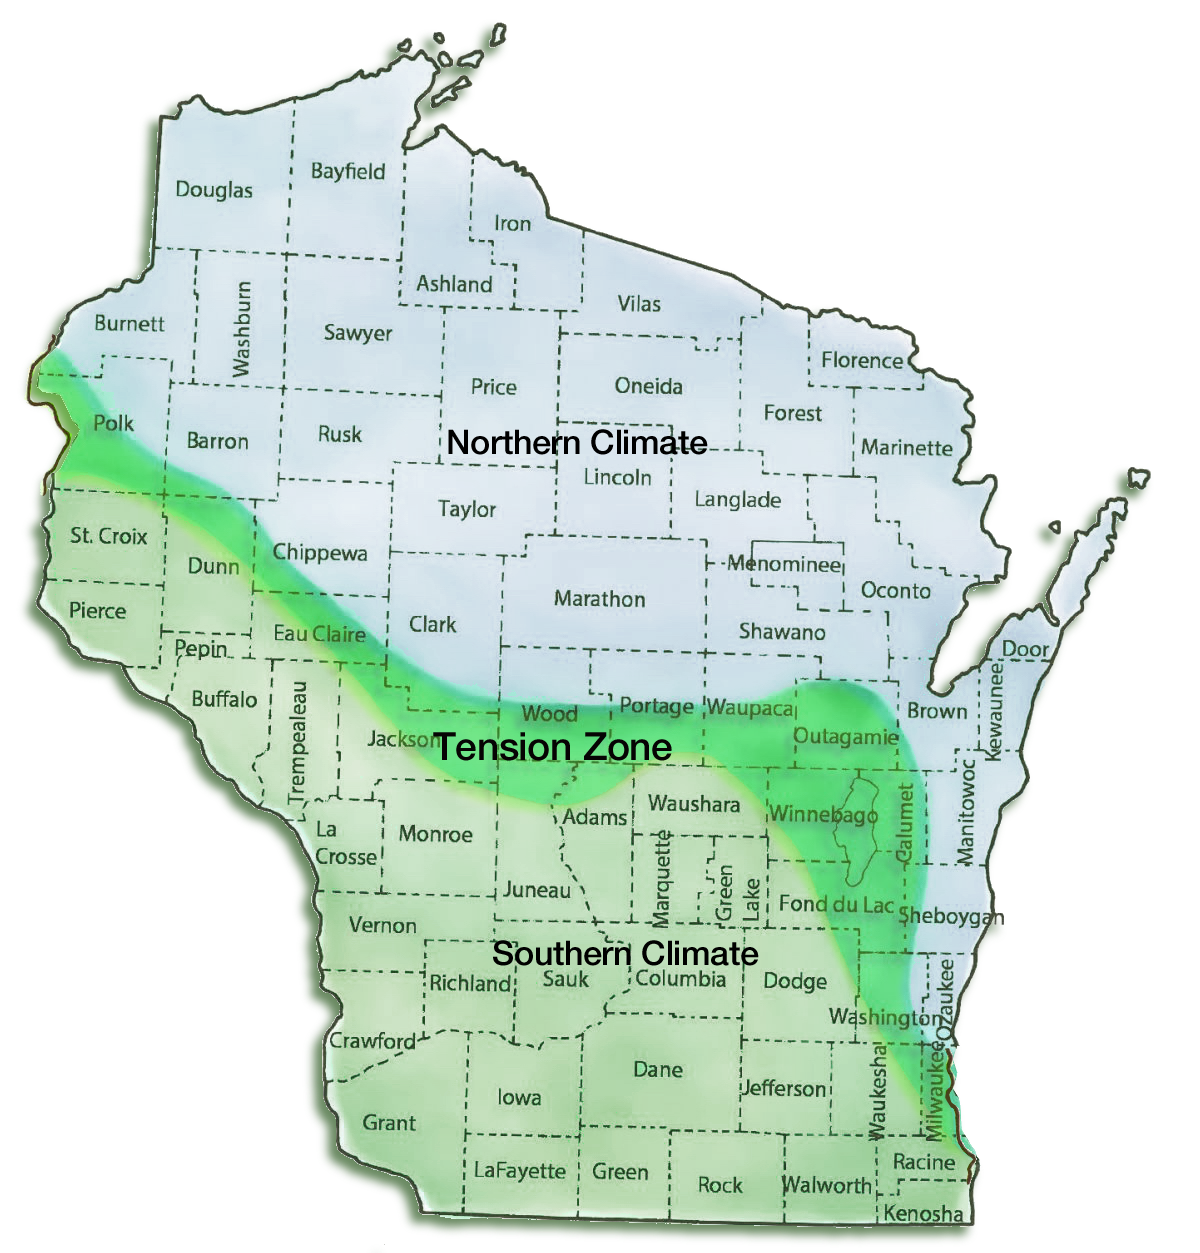 Wisconsin's Tension Zone map.